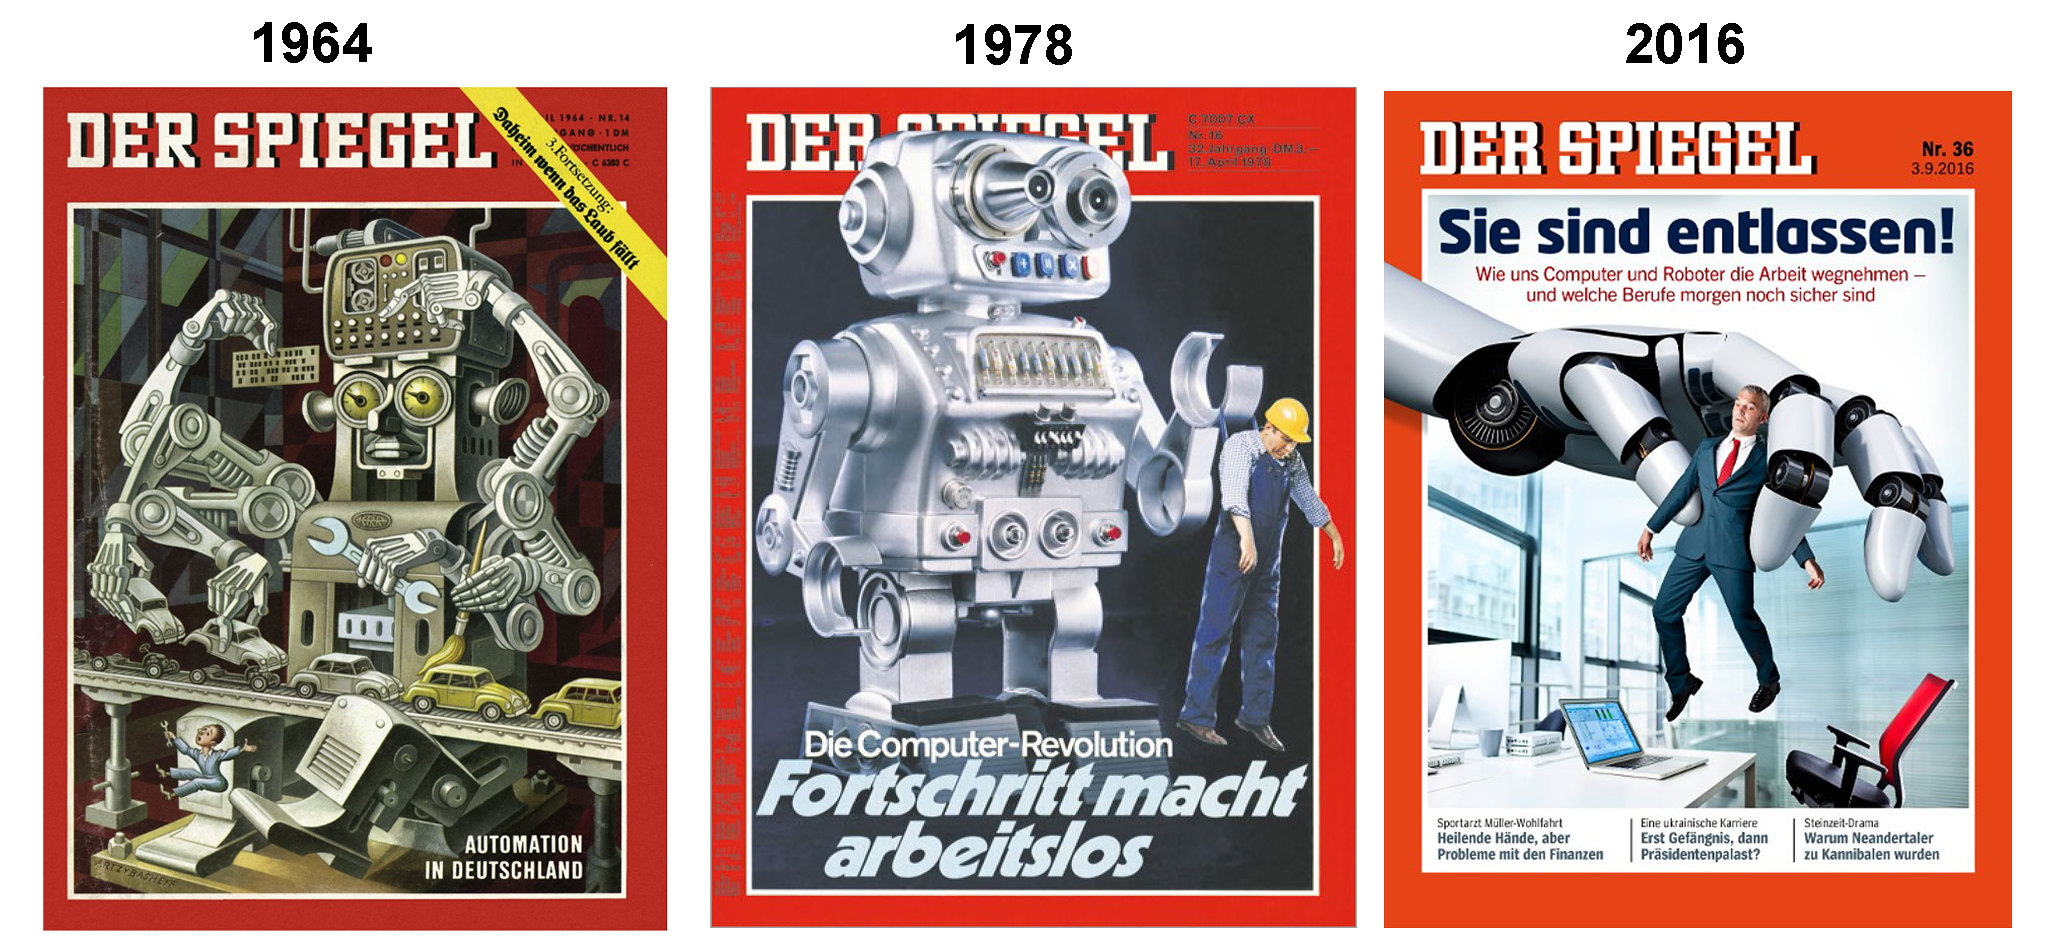 The front pages of Der Spiegel reveal fears of automation tracing back to the 1960s.